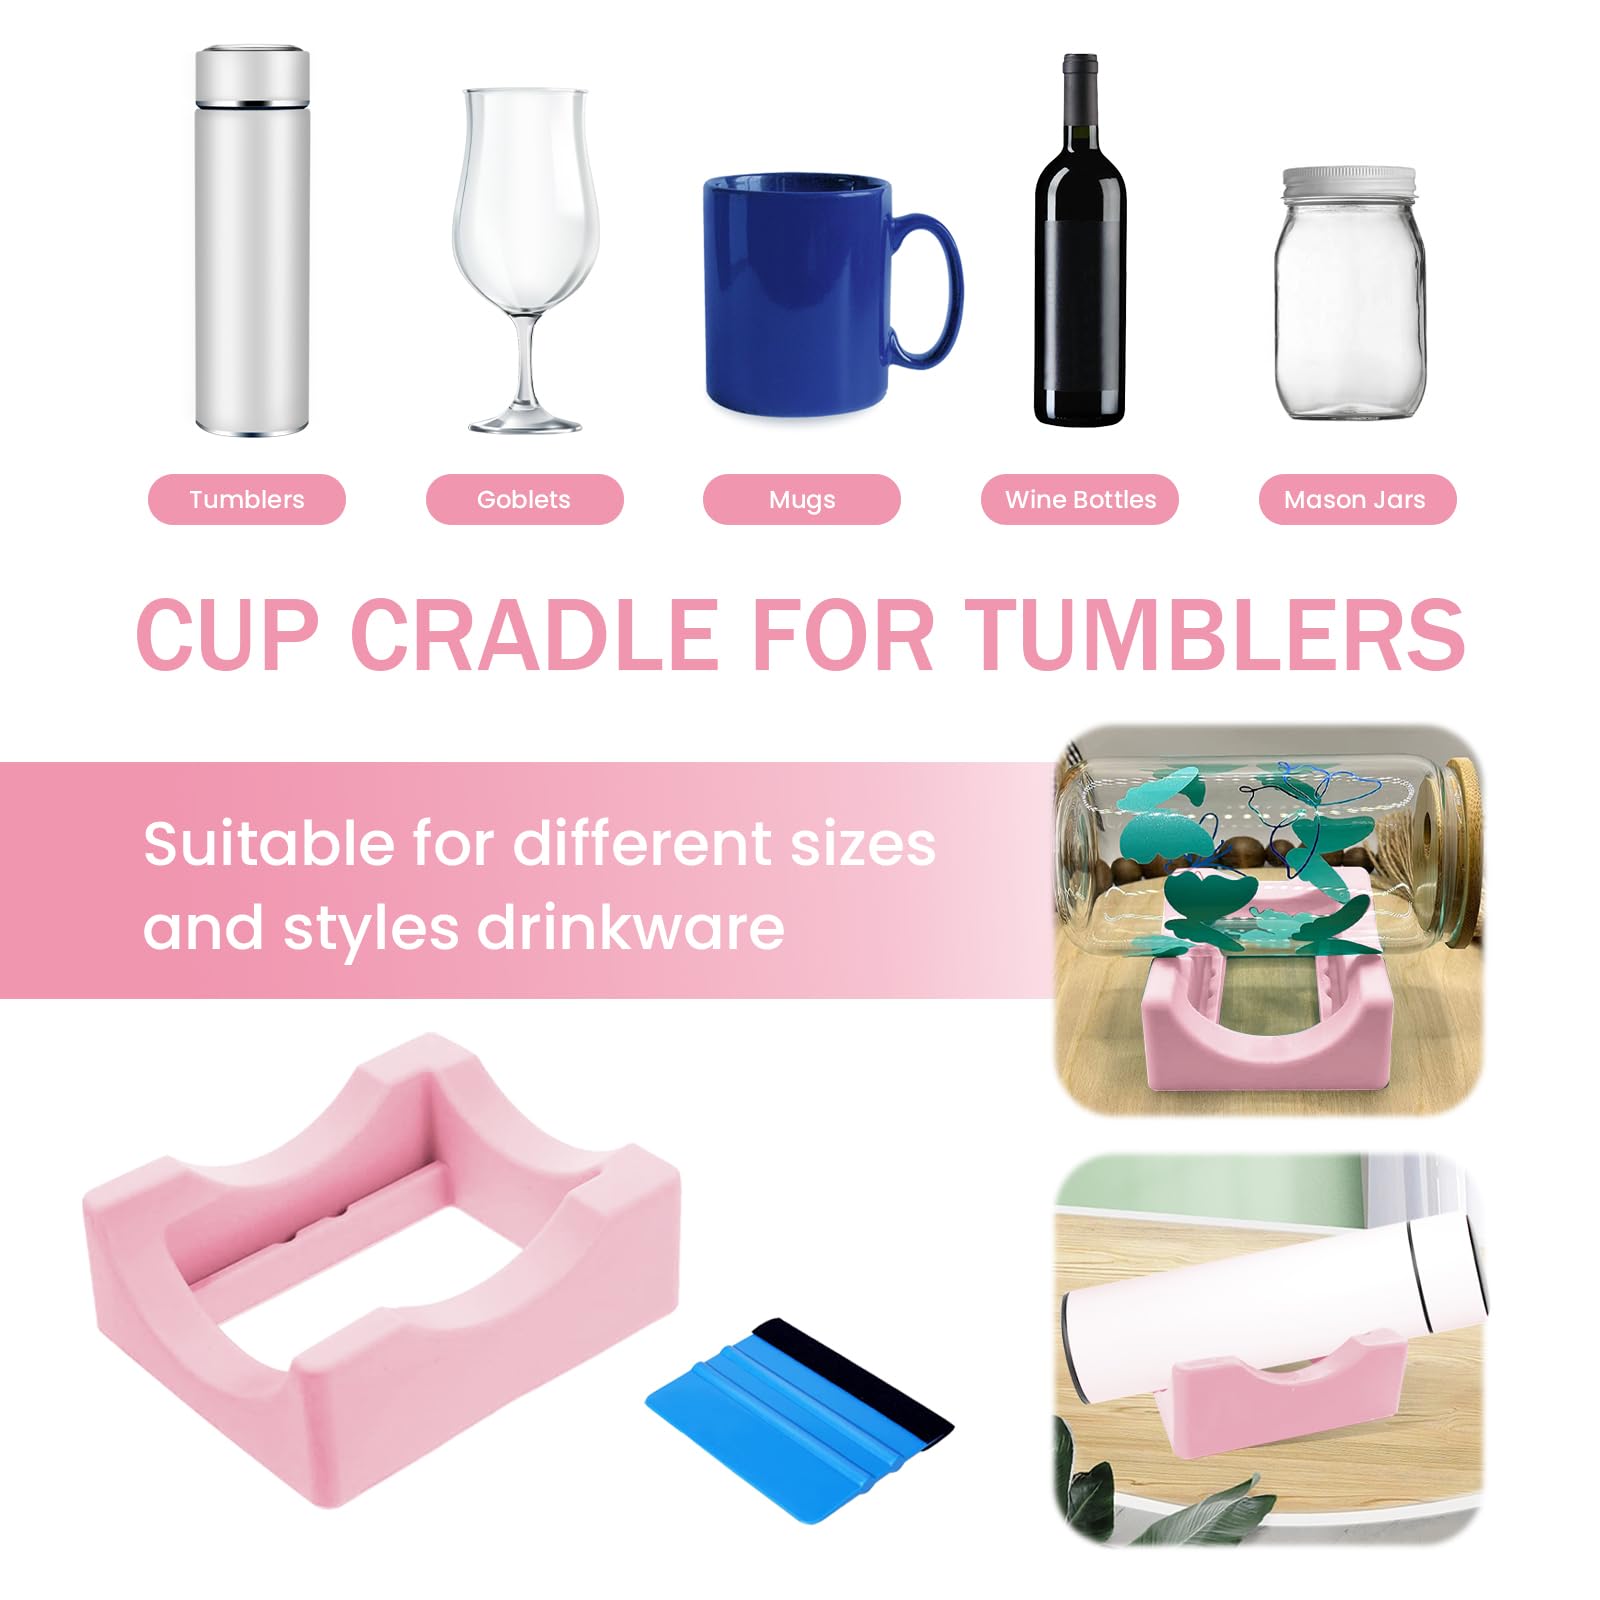 HealthSTEC Crafting Cup Cradle with Silicone Material and Felt Edge Squeegee Ideal for Applying Vinyl Decals on Tumblers Anti-Skid Design(Pink)